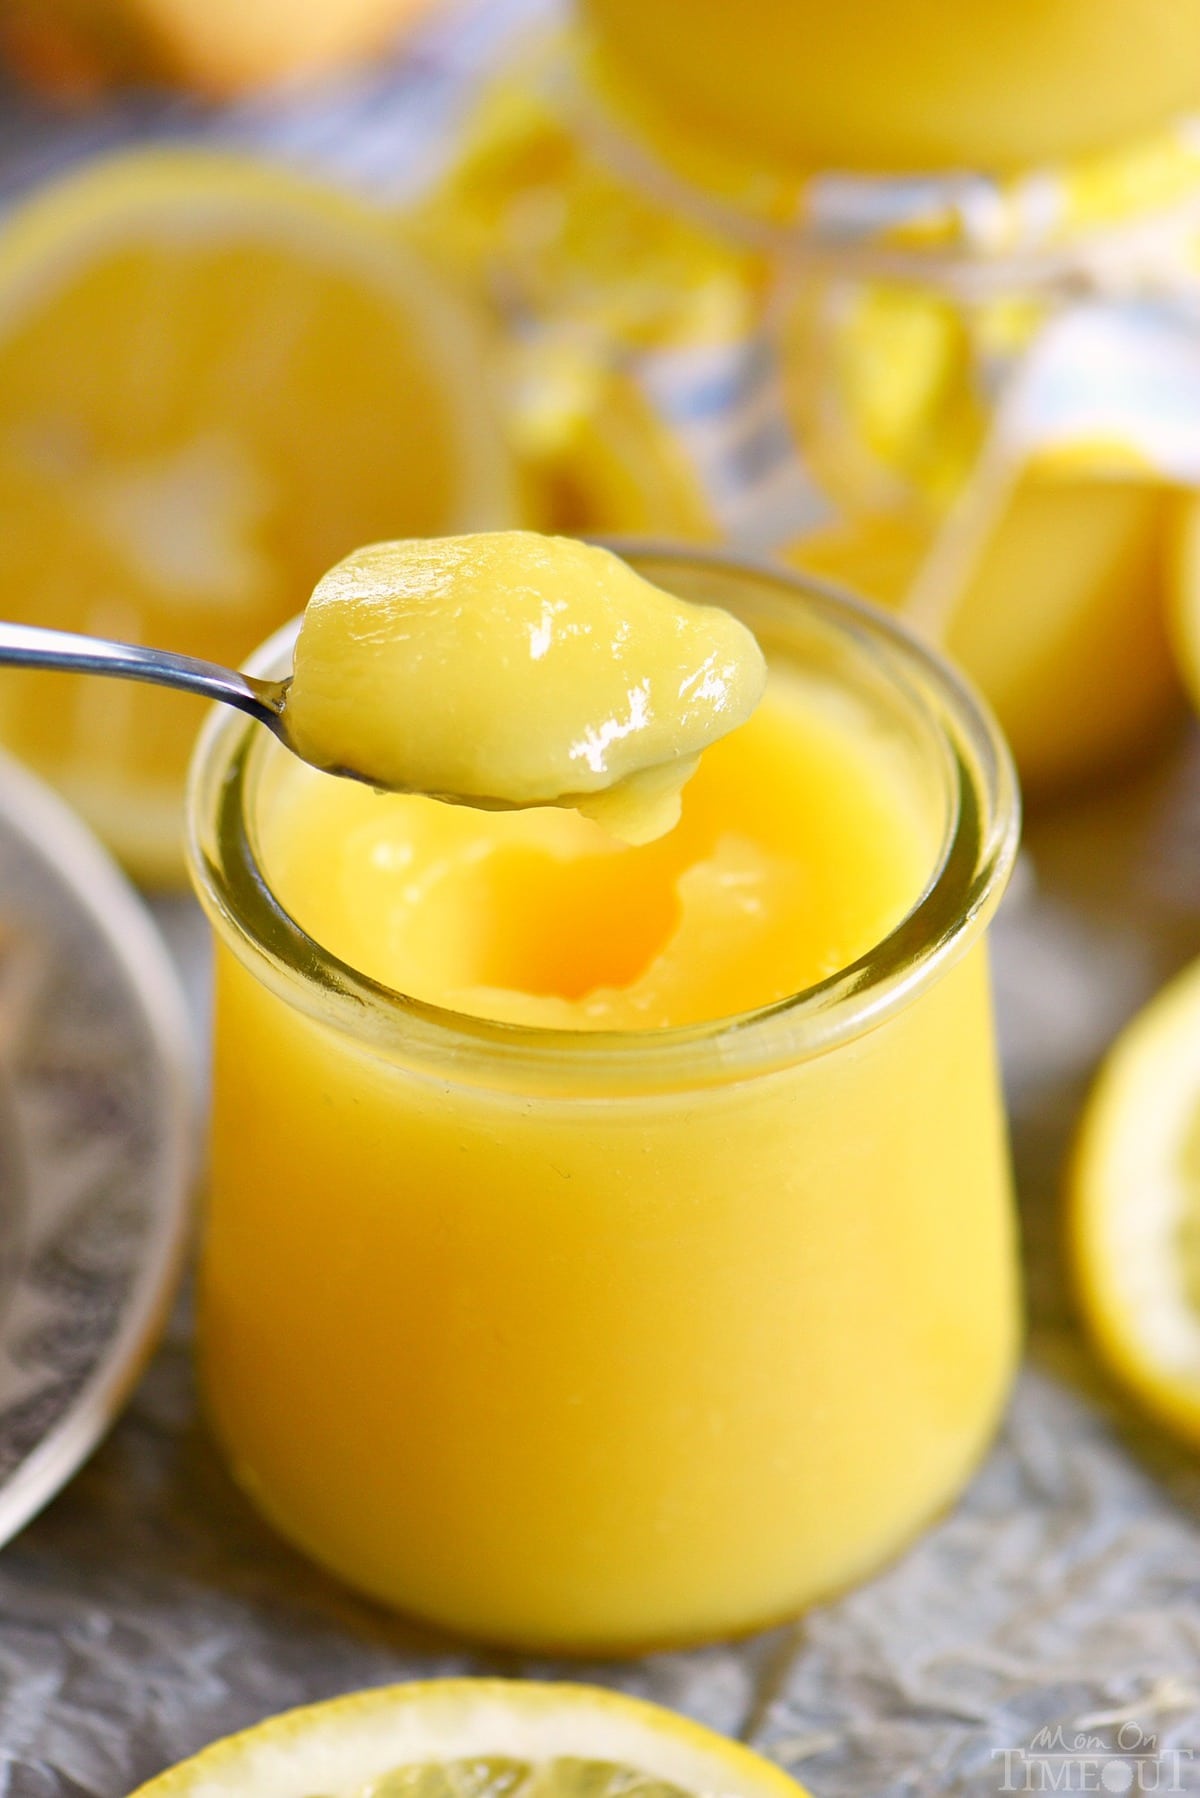 Lemon Curd Recipe - Easy and delicious - Mitzie Mee Blog